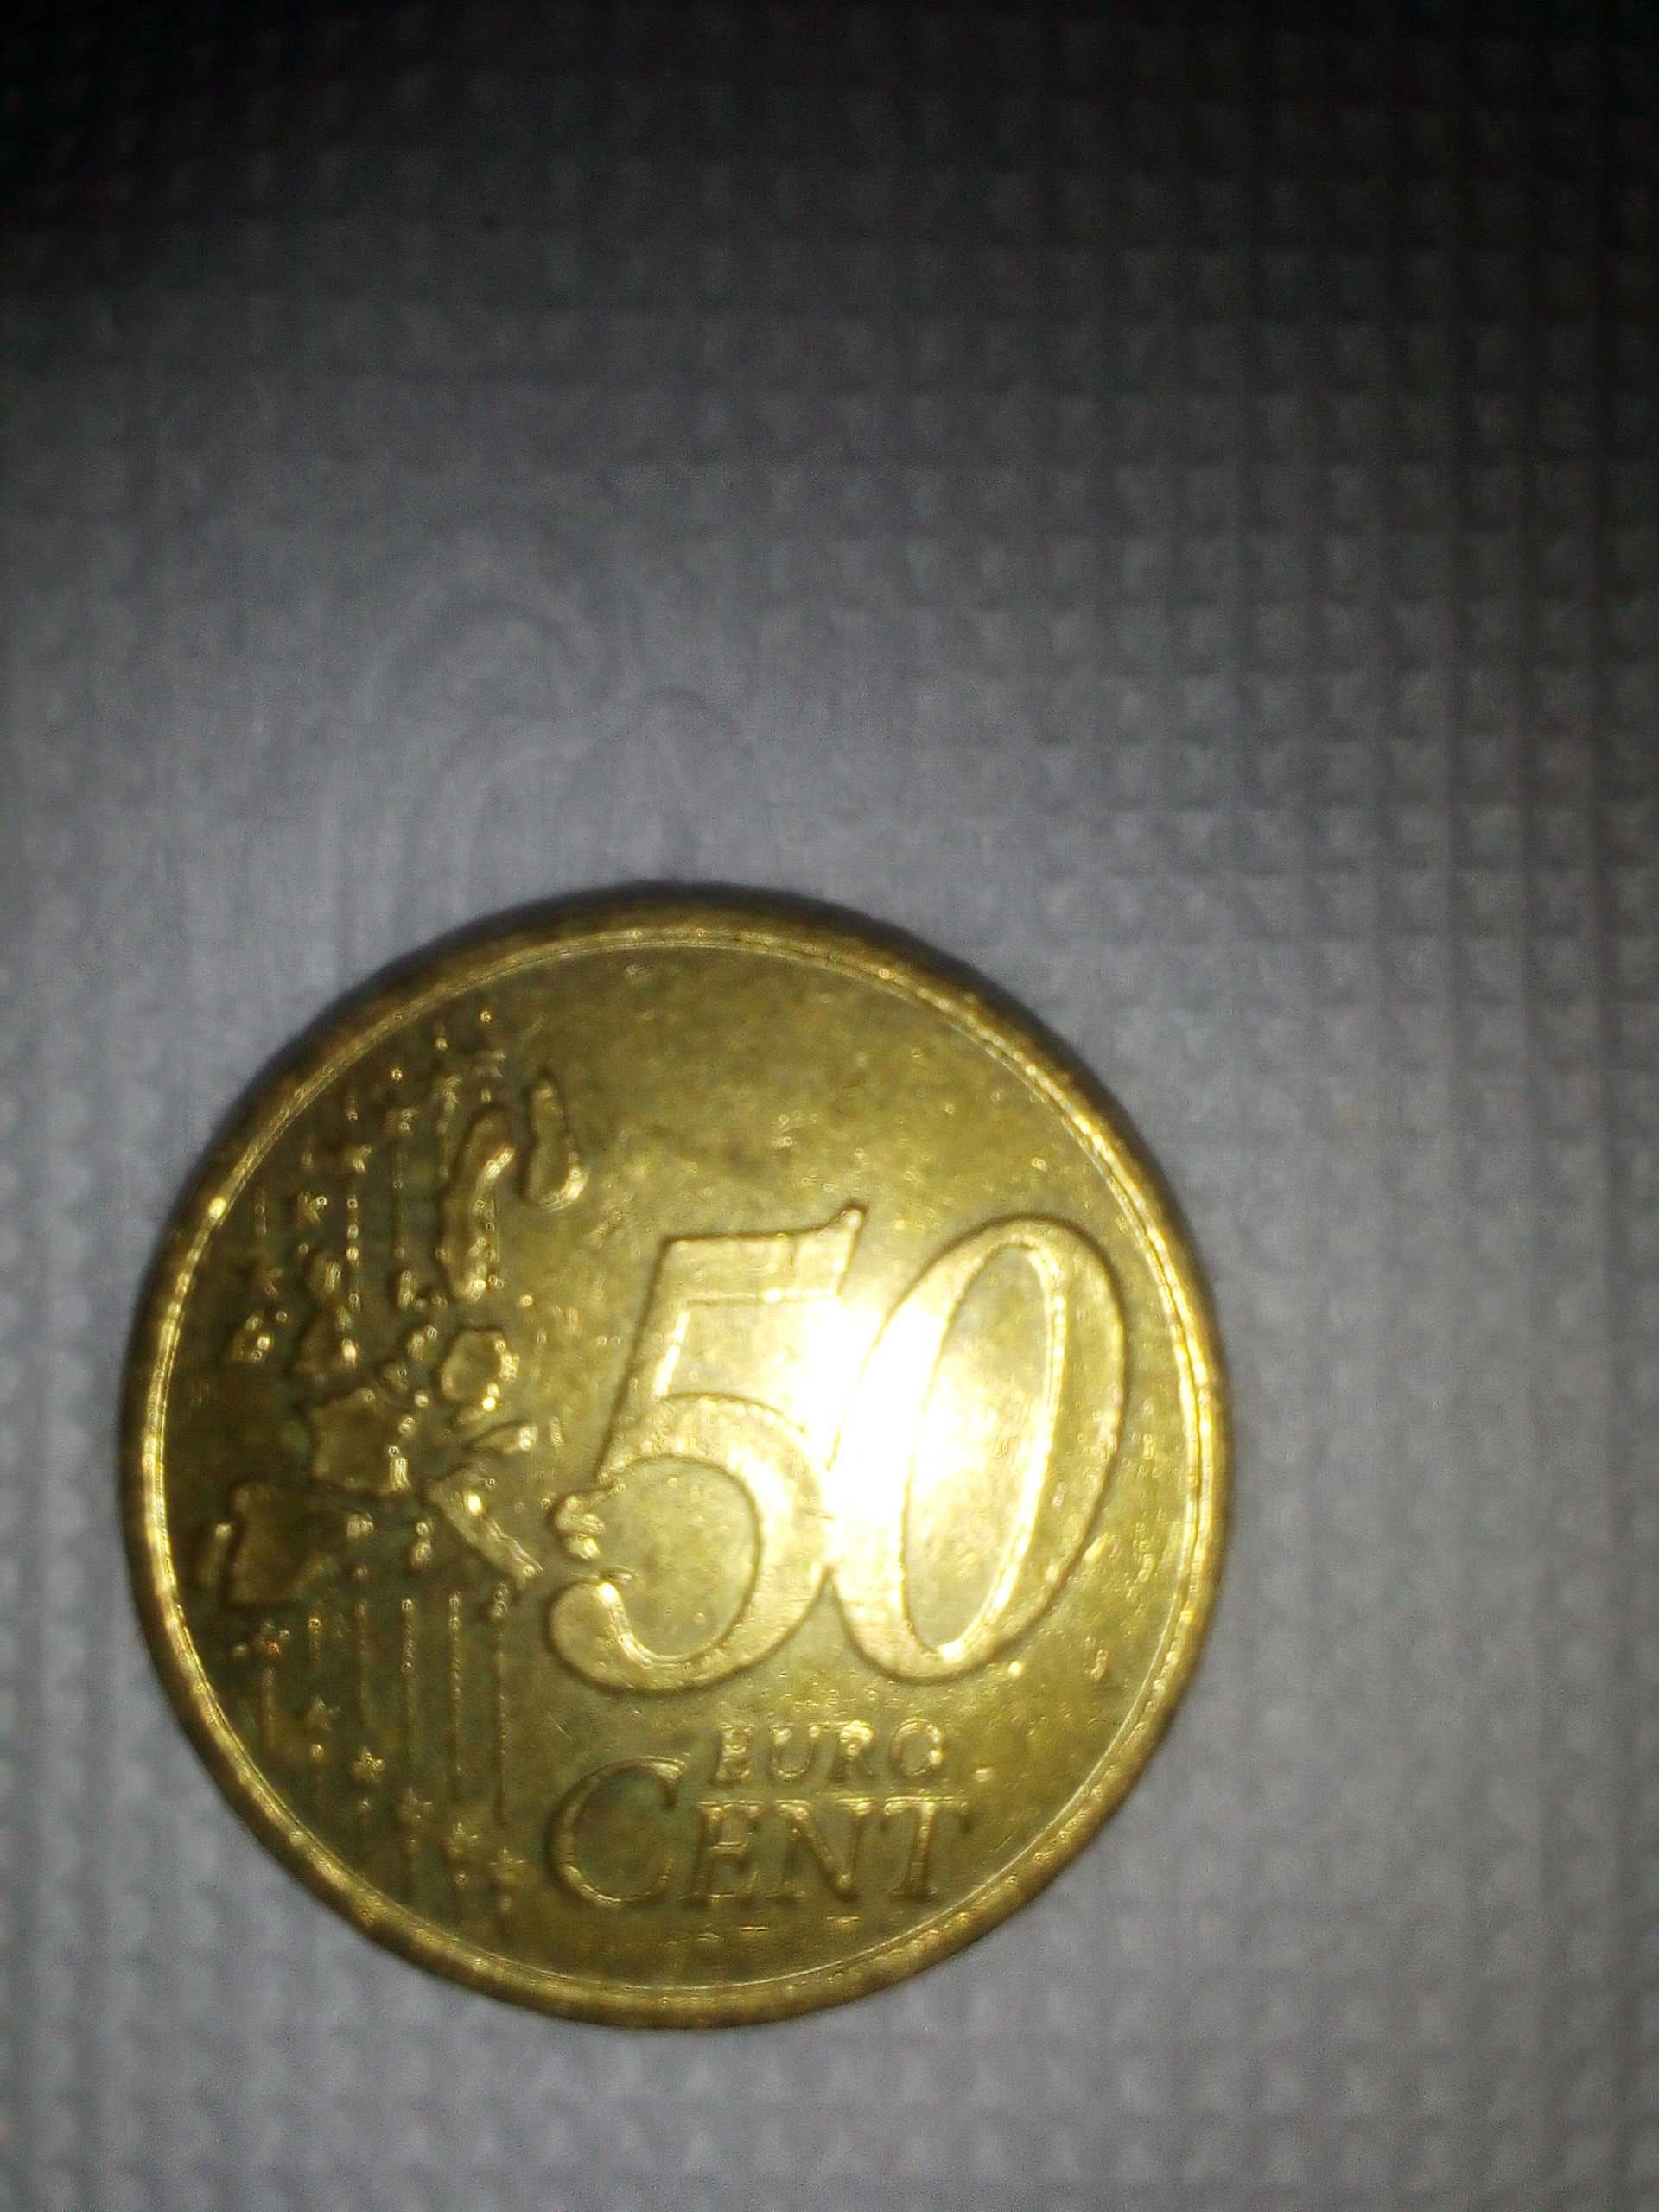 Euro cent, fifty cent 50